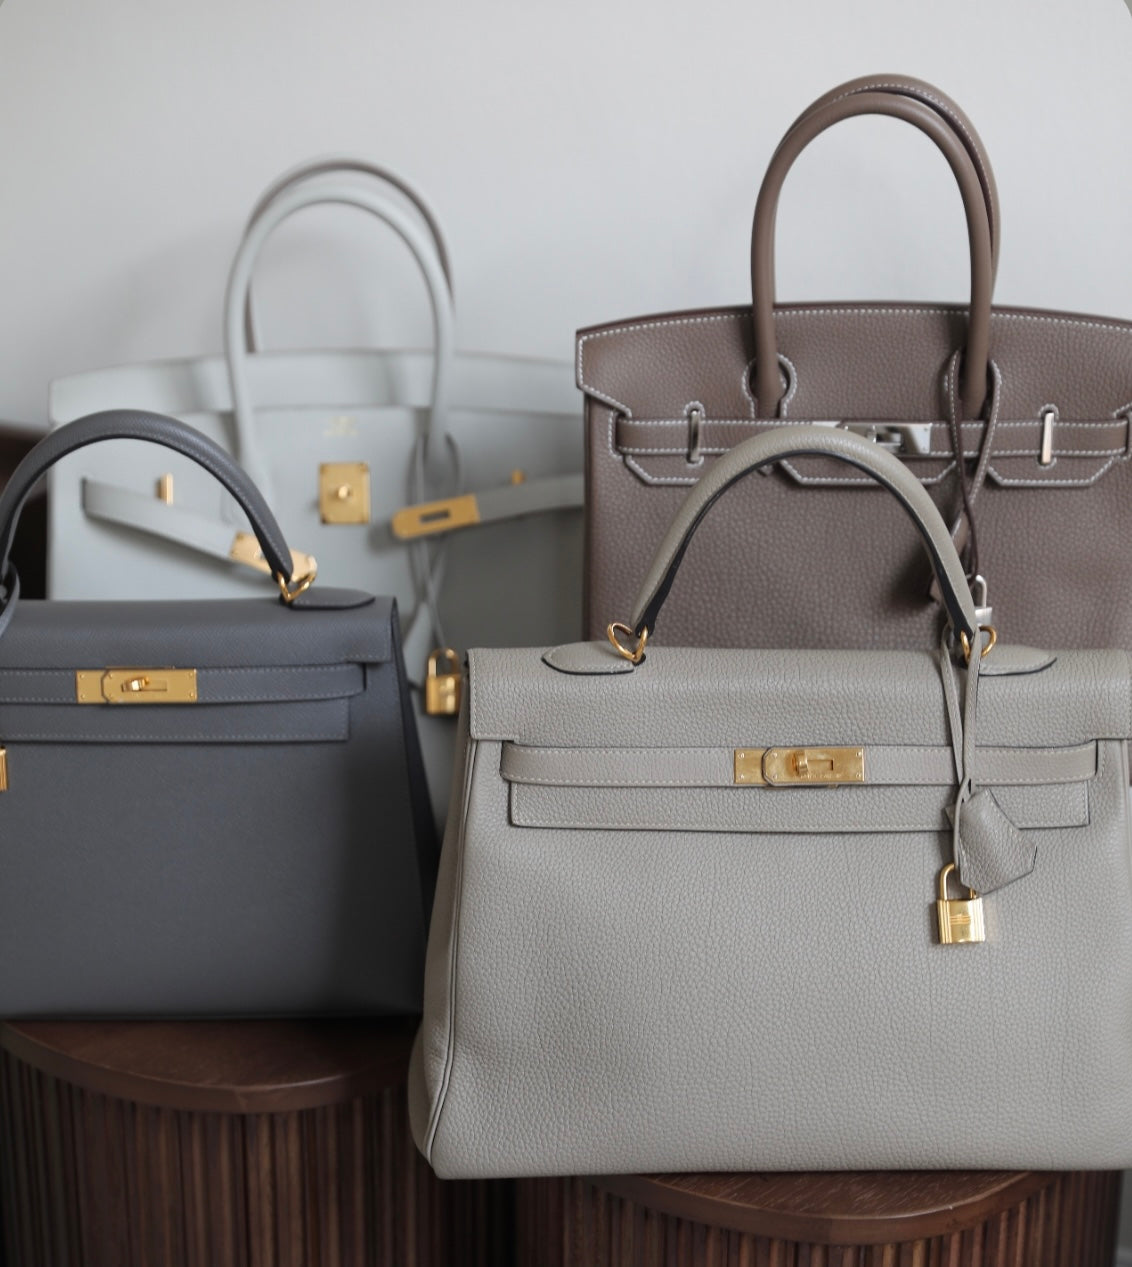 Hermes Birkin VS Kelly bag detailed comparison - difference in